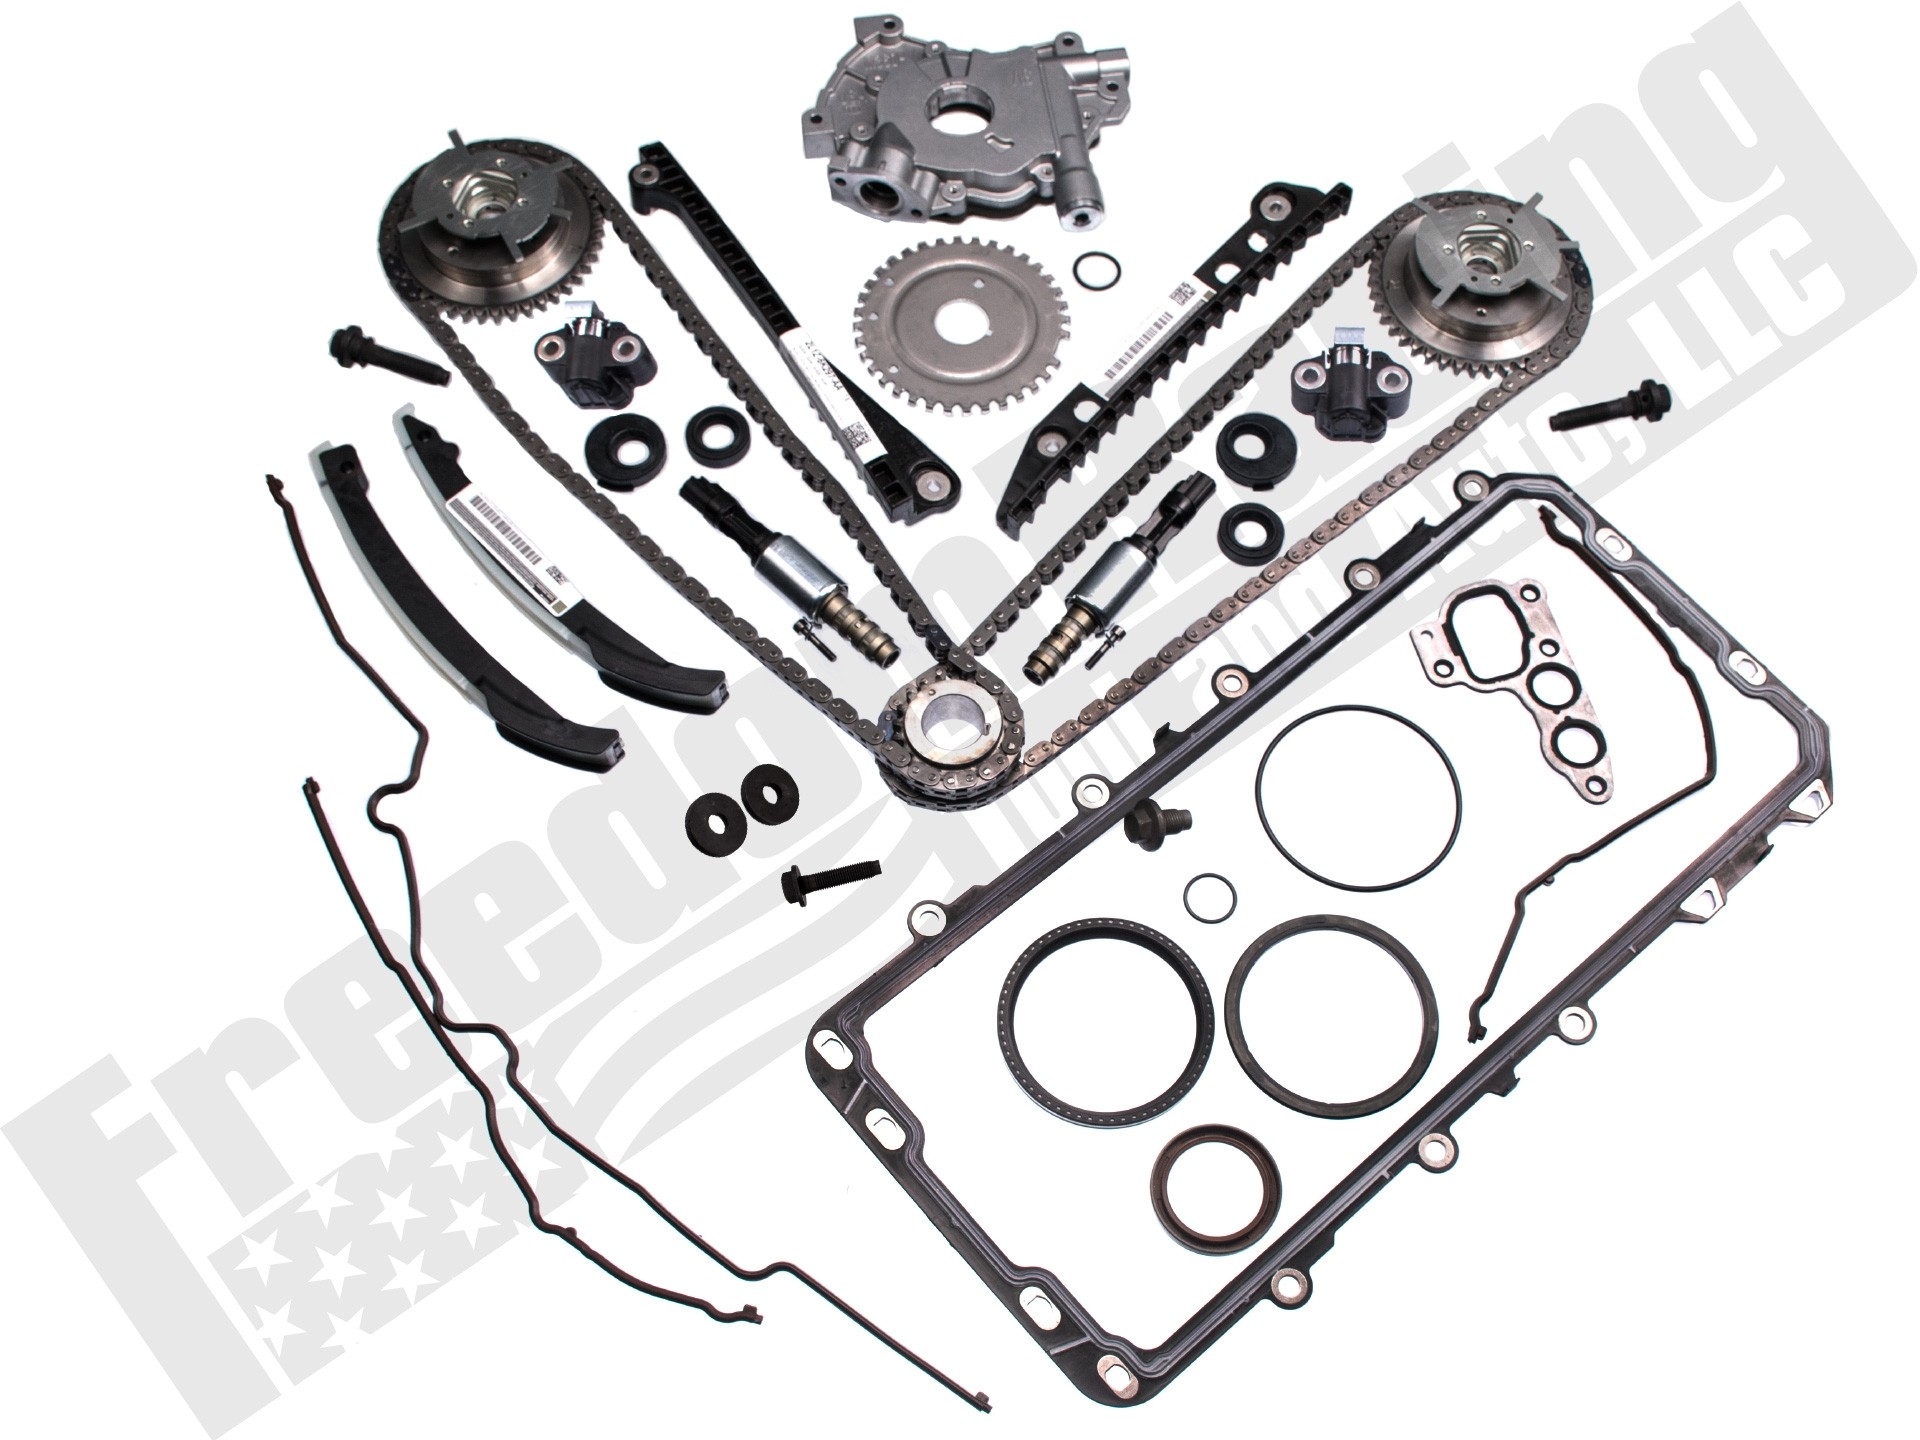 Timing Chain Kit w/o Gears Oil Pump Fit 97-04 Ford Lincoln 5.4 330CID SOHC 